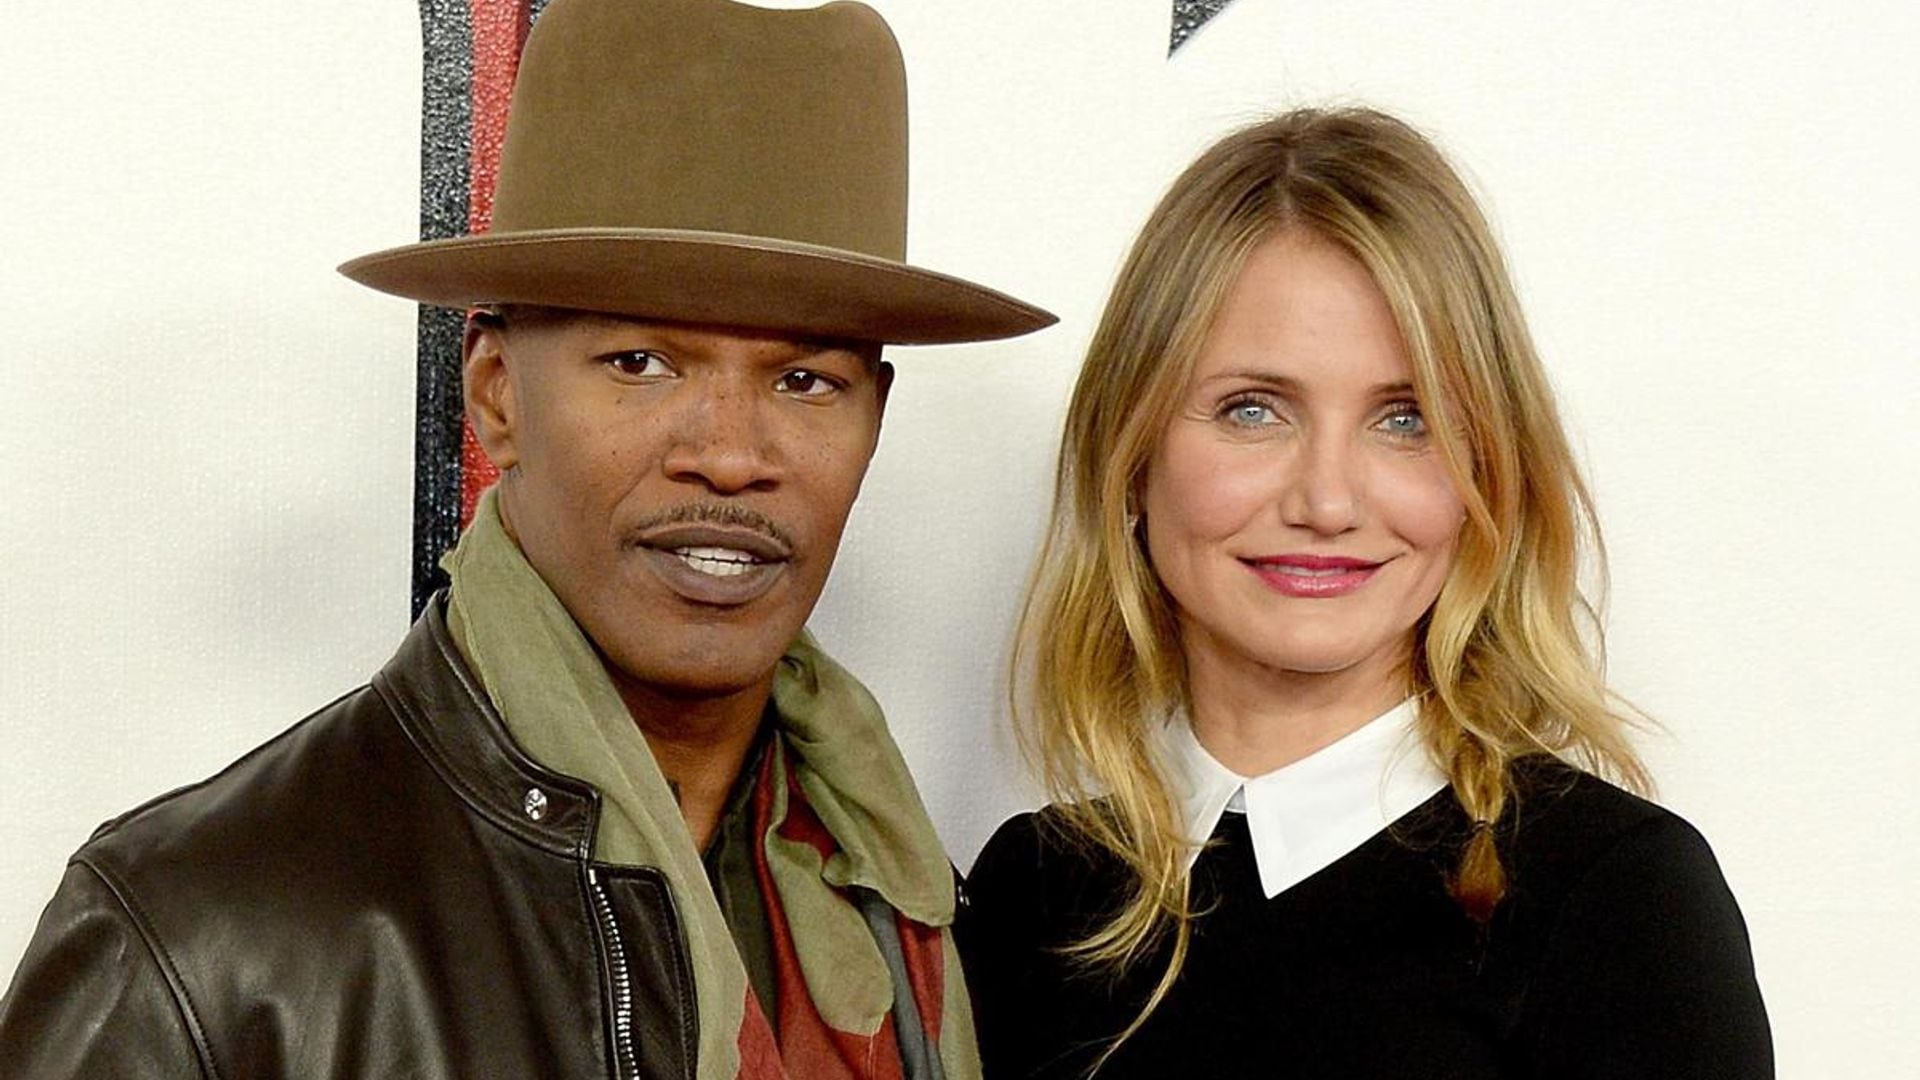 Cameron Diaz might go back into retirement after Jamie Foxx’s film ‘Back in Action’